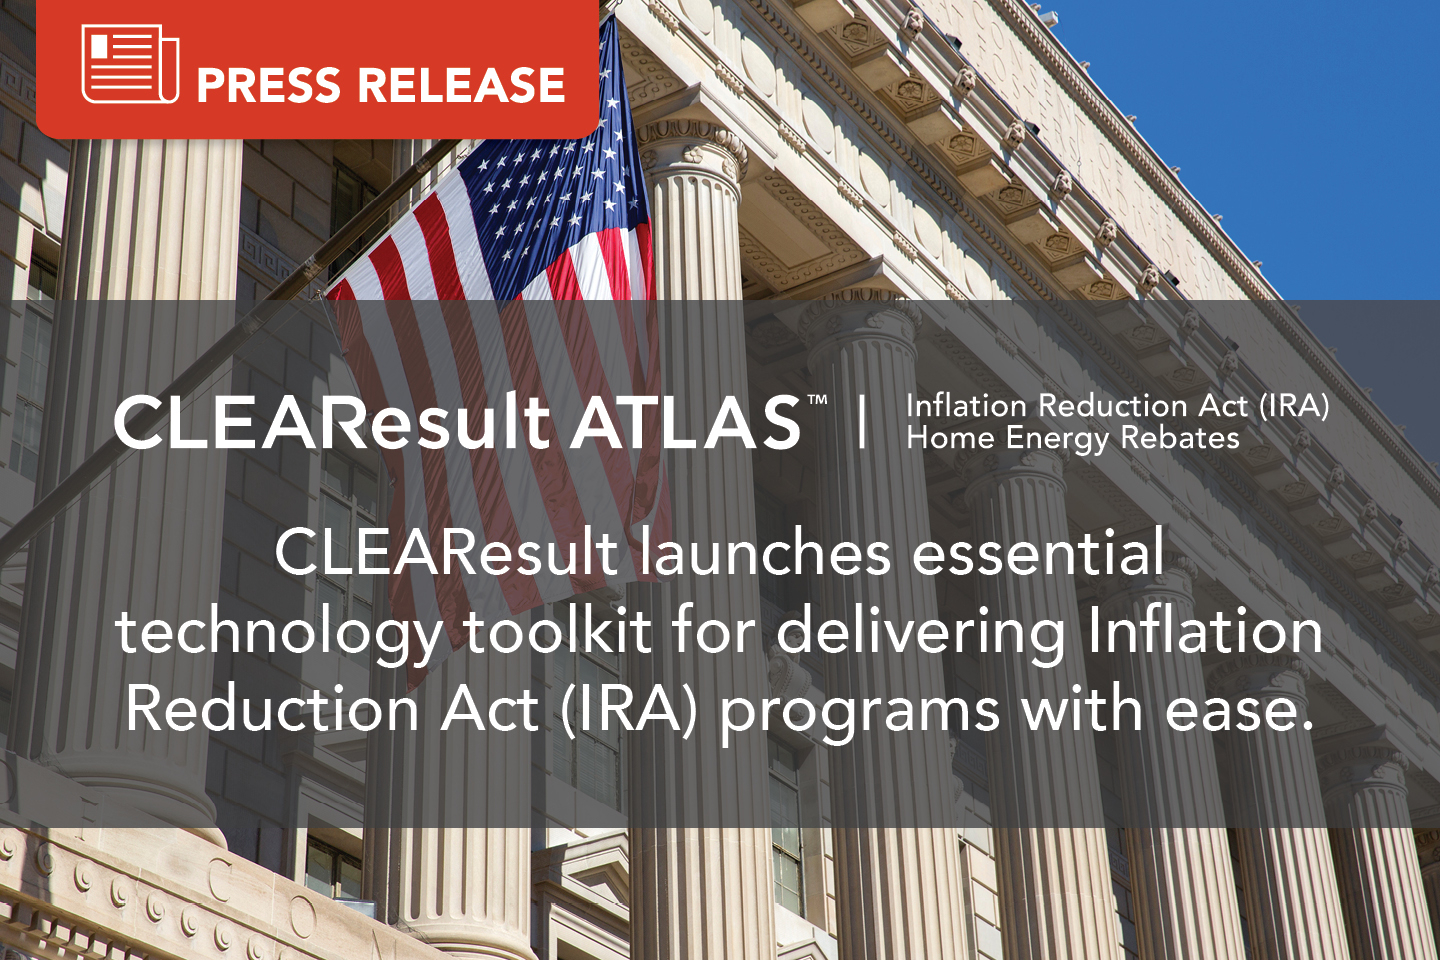 CLEAResult Launches Essential Technology Toolkit for Delivering Inflation Reduction Act (IRA) Programs with Ease